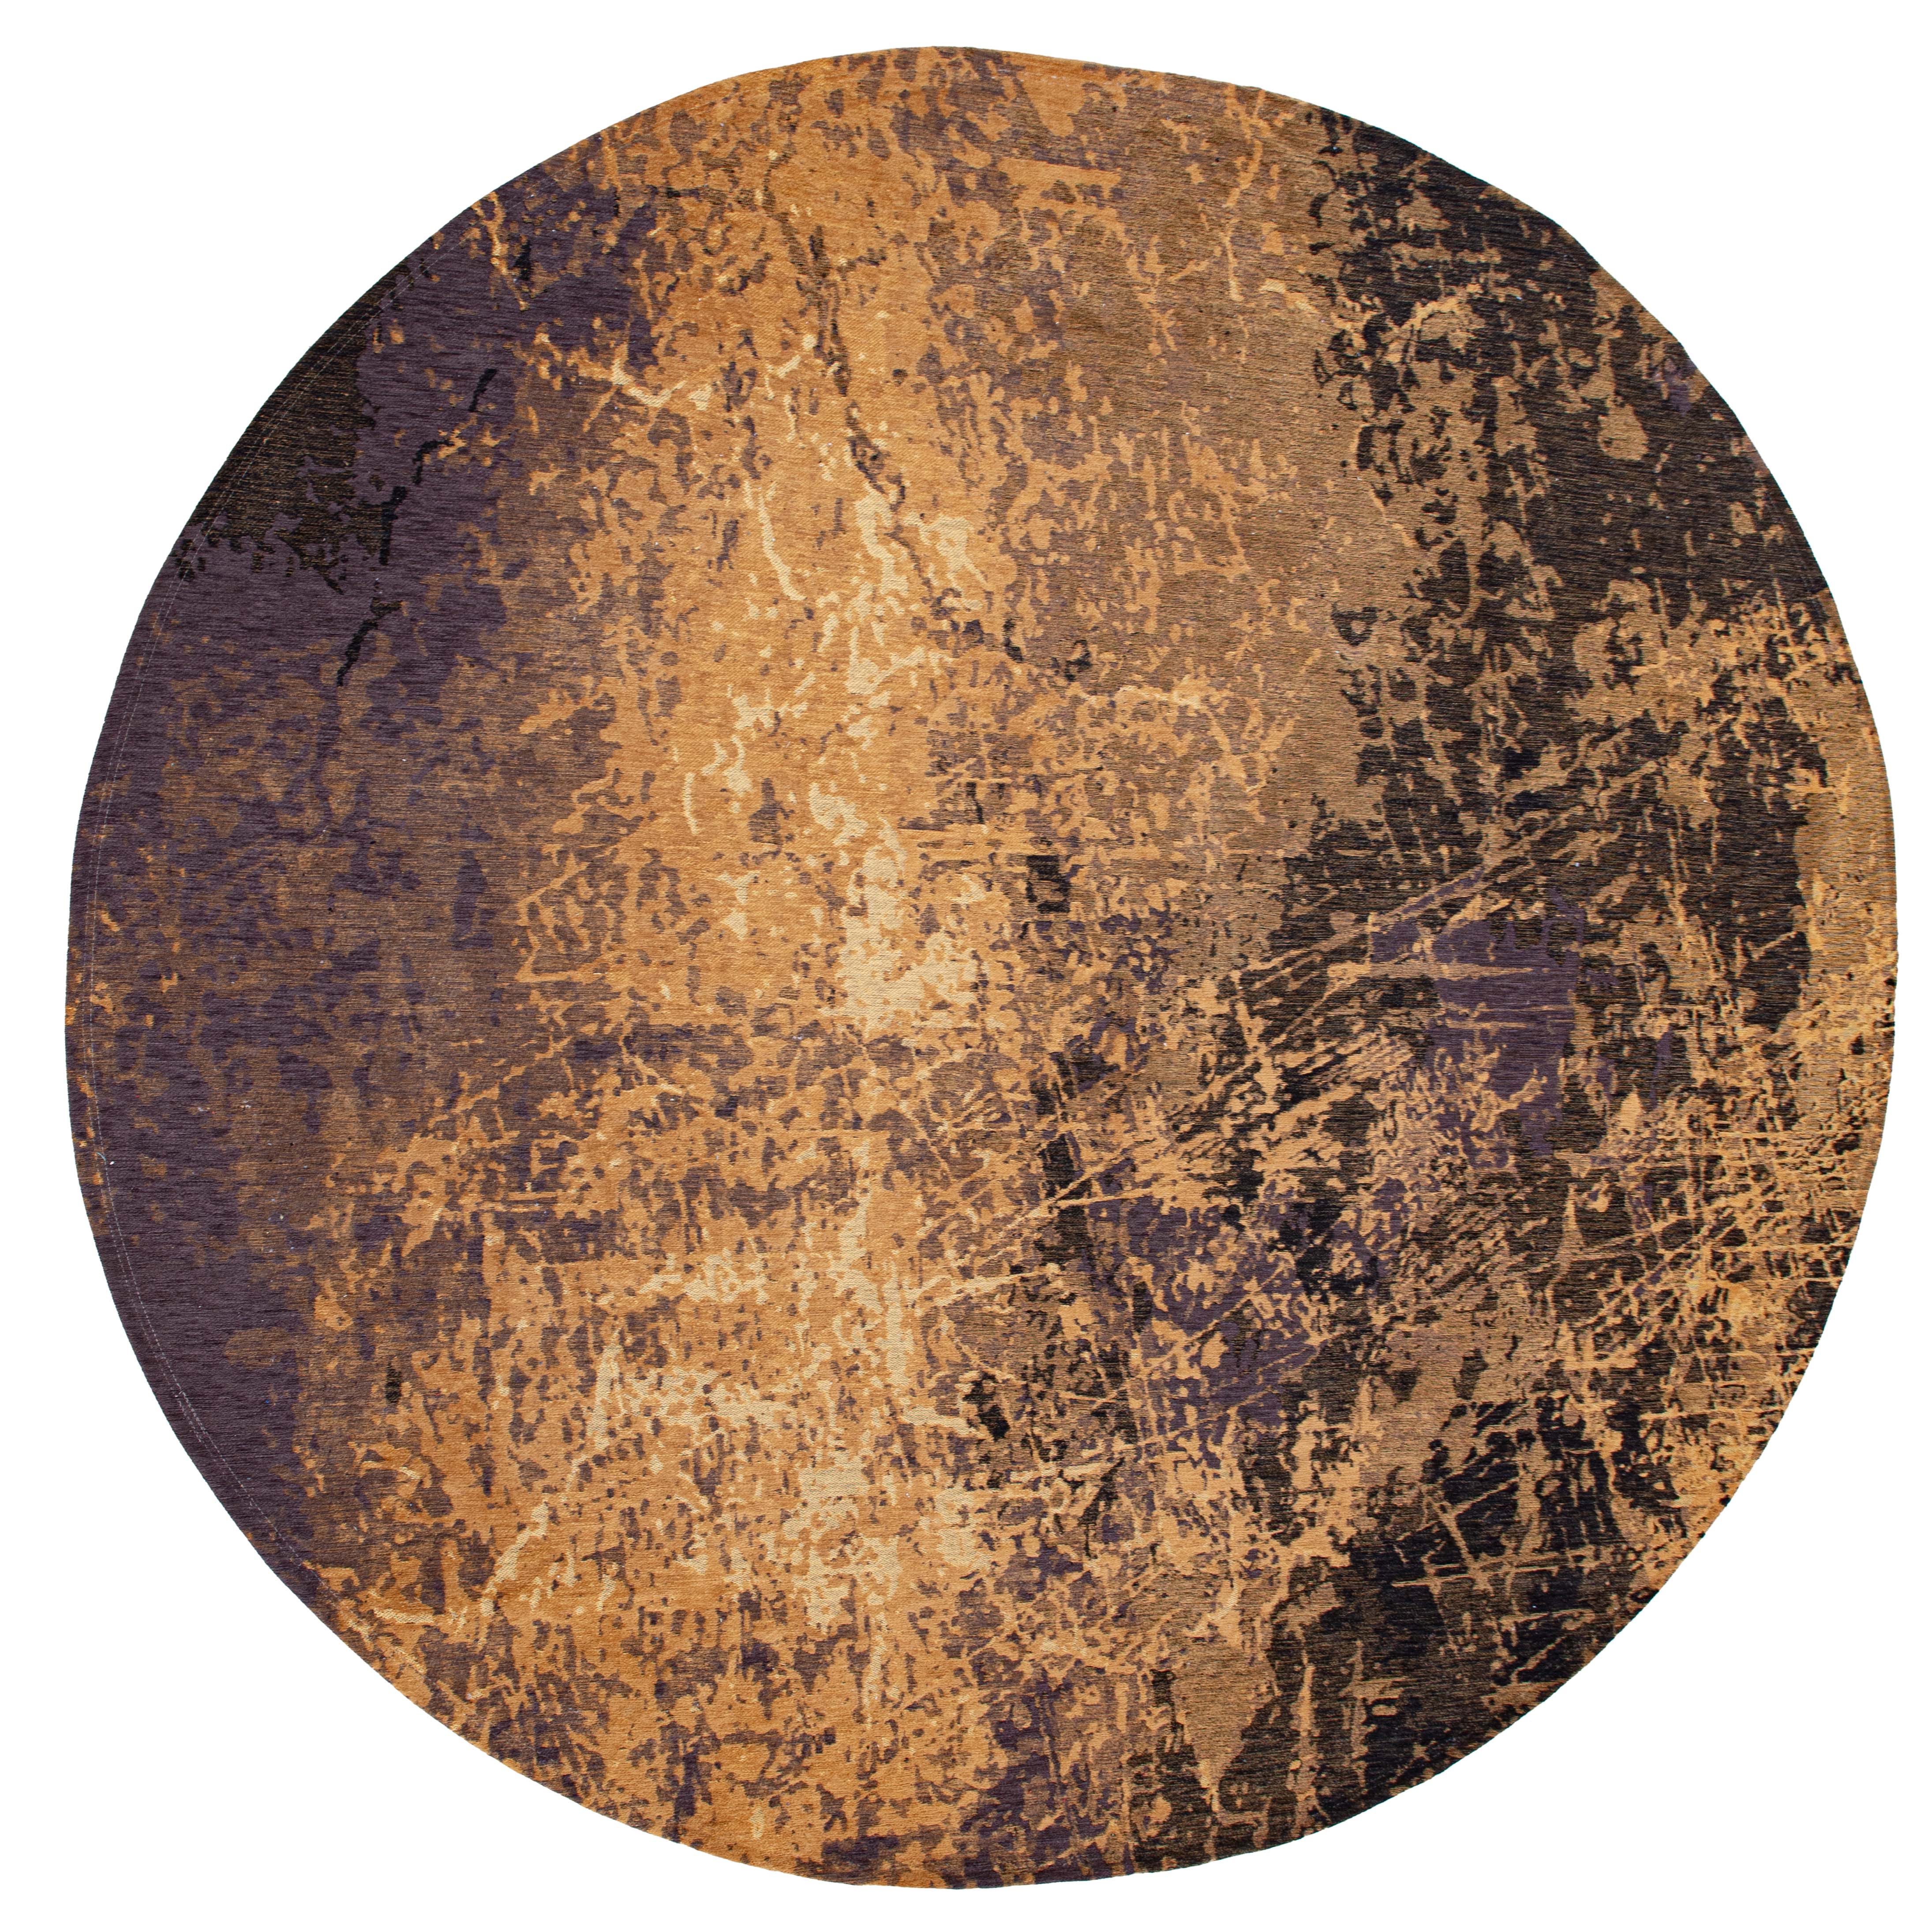 Circle flatweave rug with faded jagged abstract design in terracotta, copper and charcoal